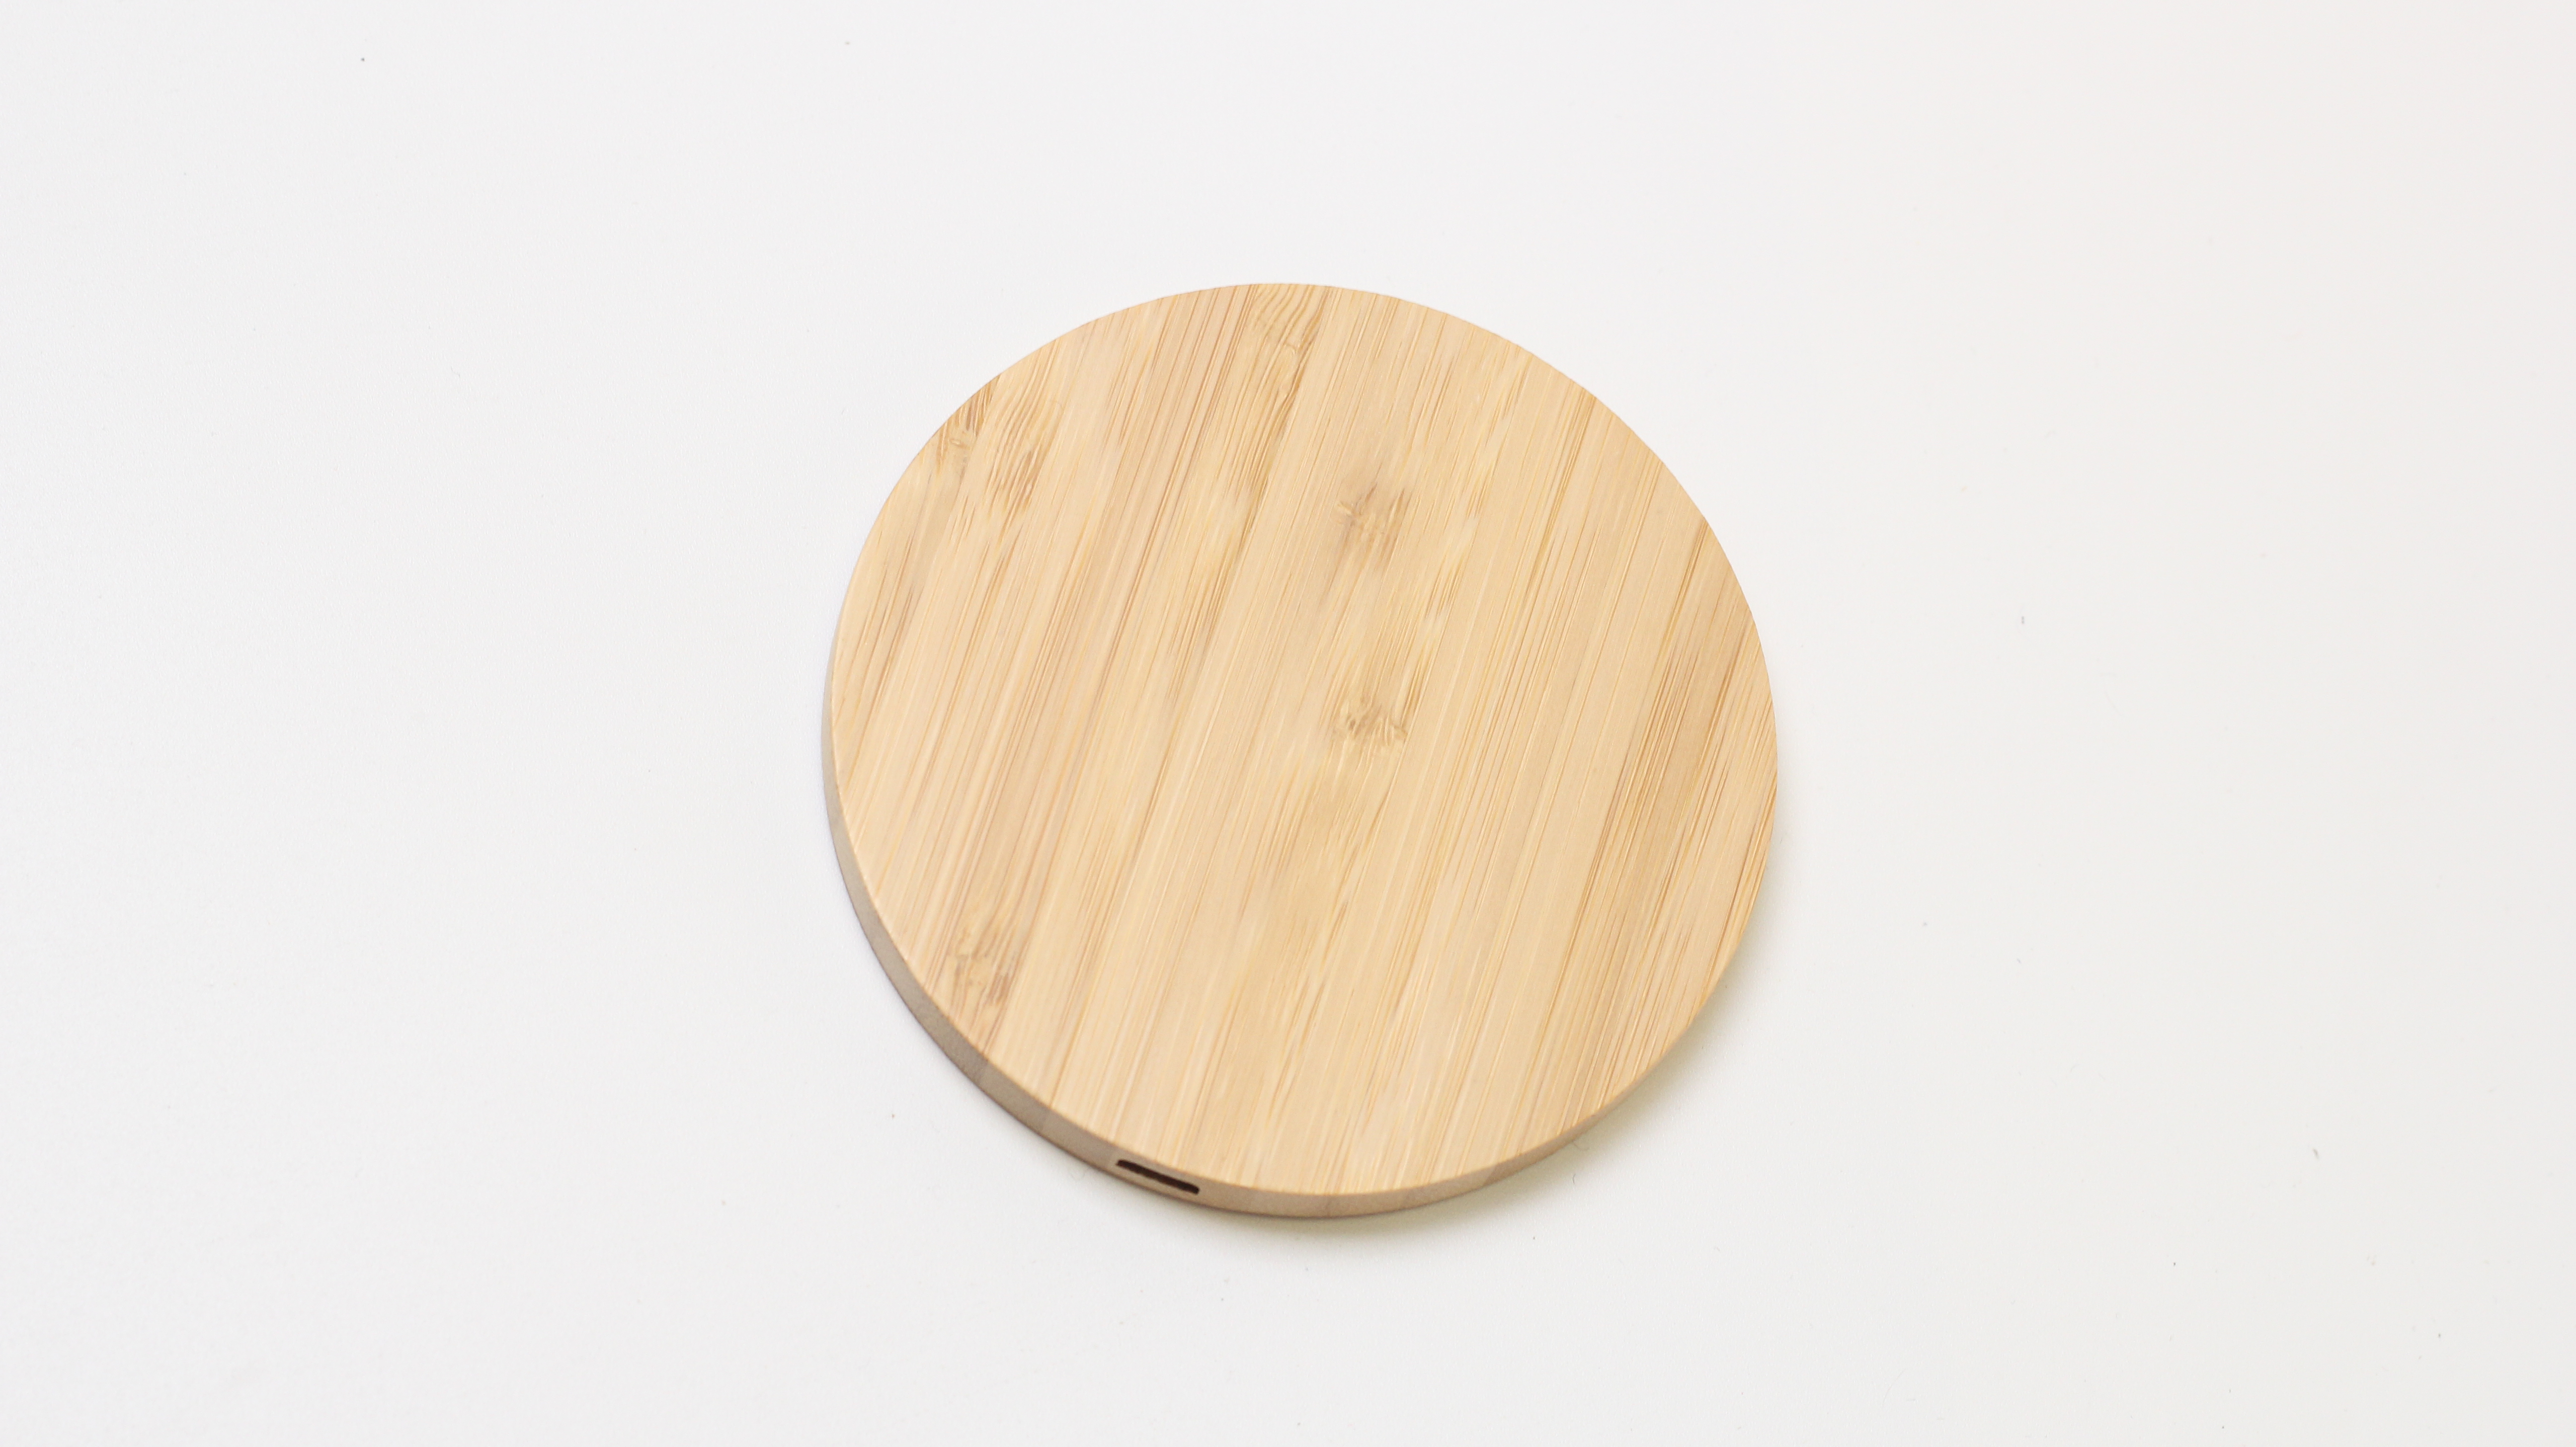 bamboo wireless charger